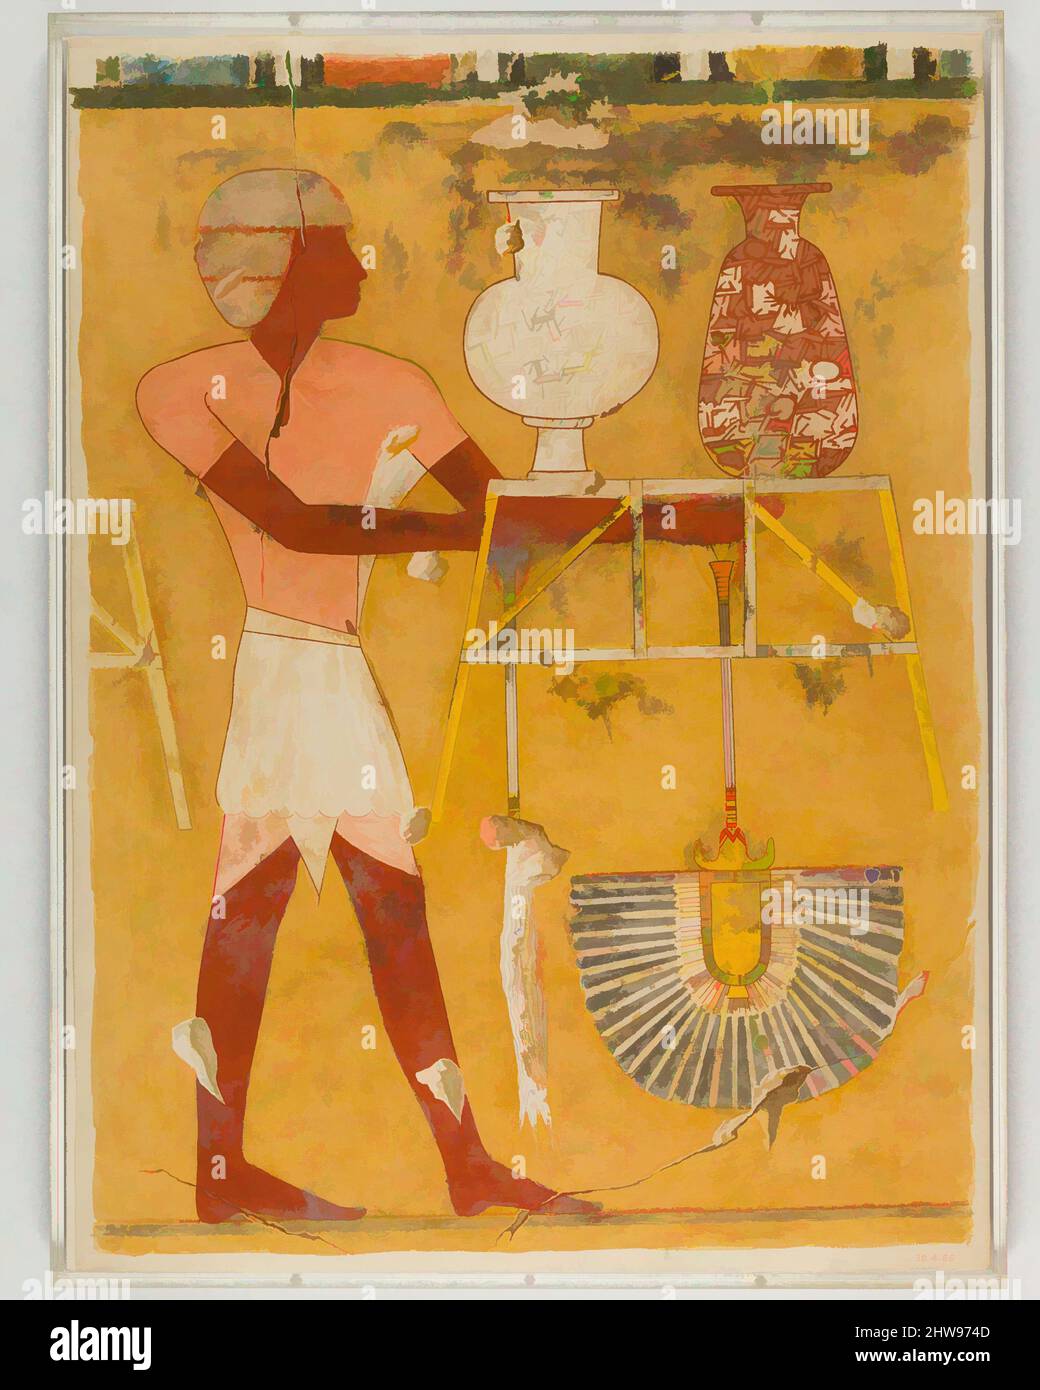 Art inspired by Man Bringing New Year's Gifts, Tomb of Qenamun, New Kingdom, Dynasty 18, ca. 1427–1400 B.C., Original from Egypt, Upper Egypt, Thebes, Sheikh Abd el-Qurna, TT 93, Tempera on paper, facsimile: h. 53 cm ( 20 7/8 in); w. 39 cm ( 15 3/8 in), Hugh R. Hopgood, Classic works modernized by Artotop with a splash of modernity. Shapes, color and value, eye-catching visual impact on art. Emotions through freedom of artworks in a contemporary way. A timeless message pursuing a wildly creative new direction. Artists turning to the digital medium and creating the Artotop NFT Stock Photo